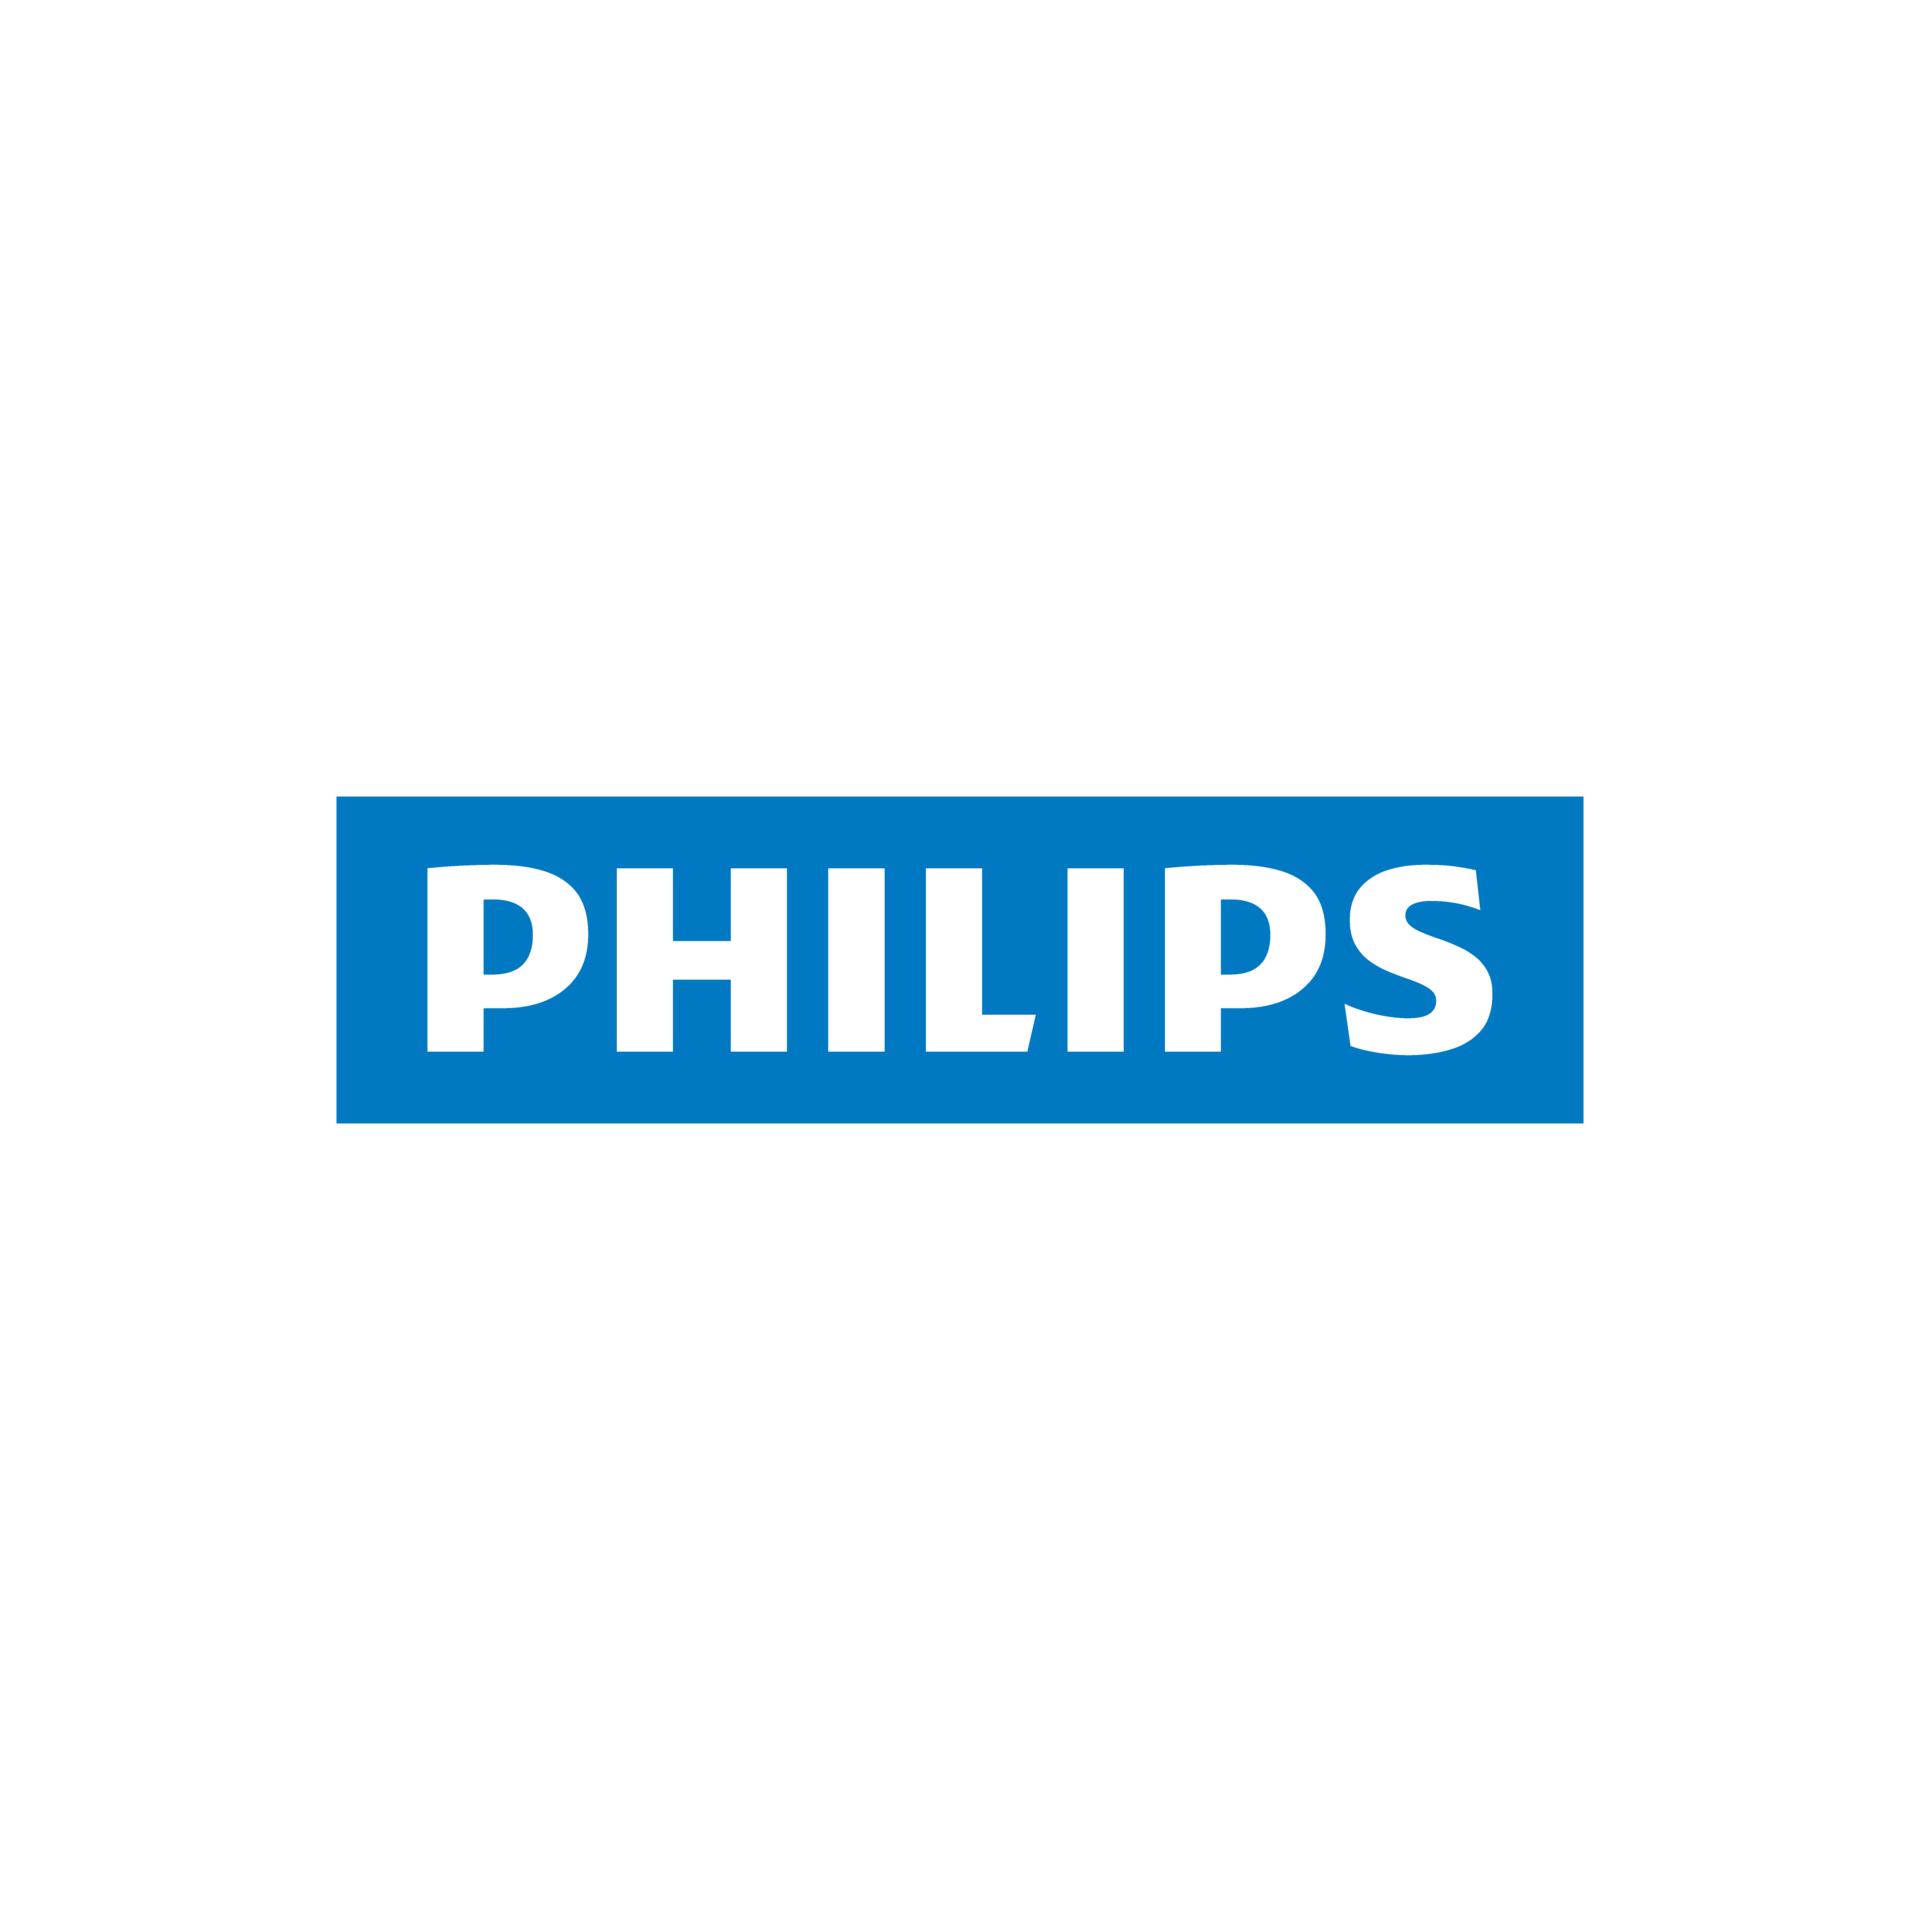 Top 129+ philips logo png latest - camera.edu.vn